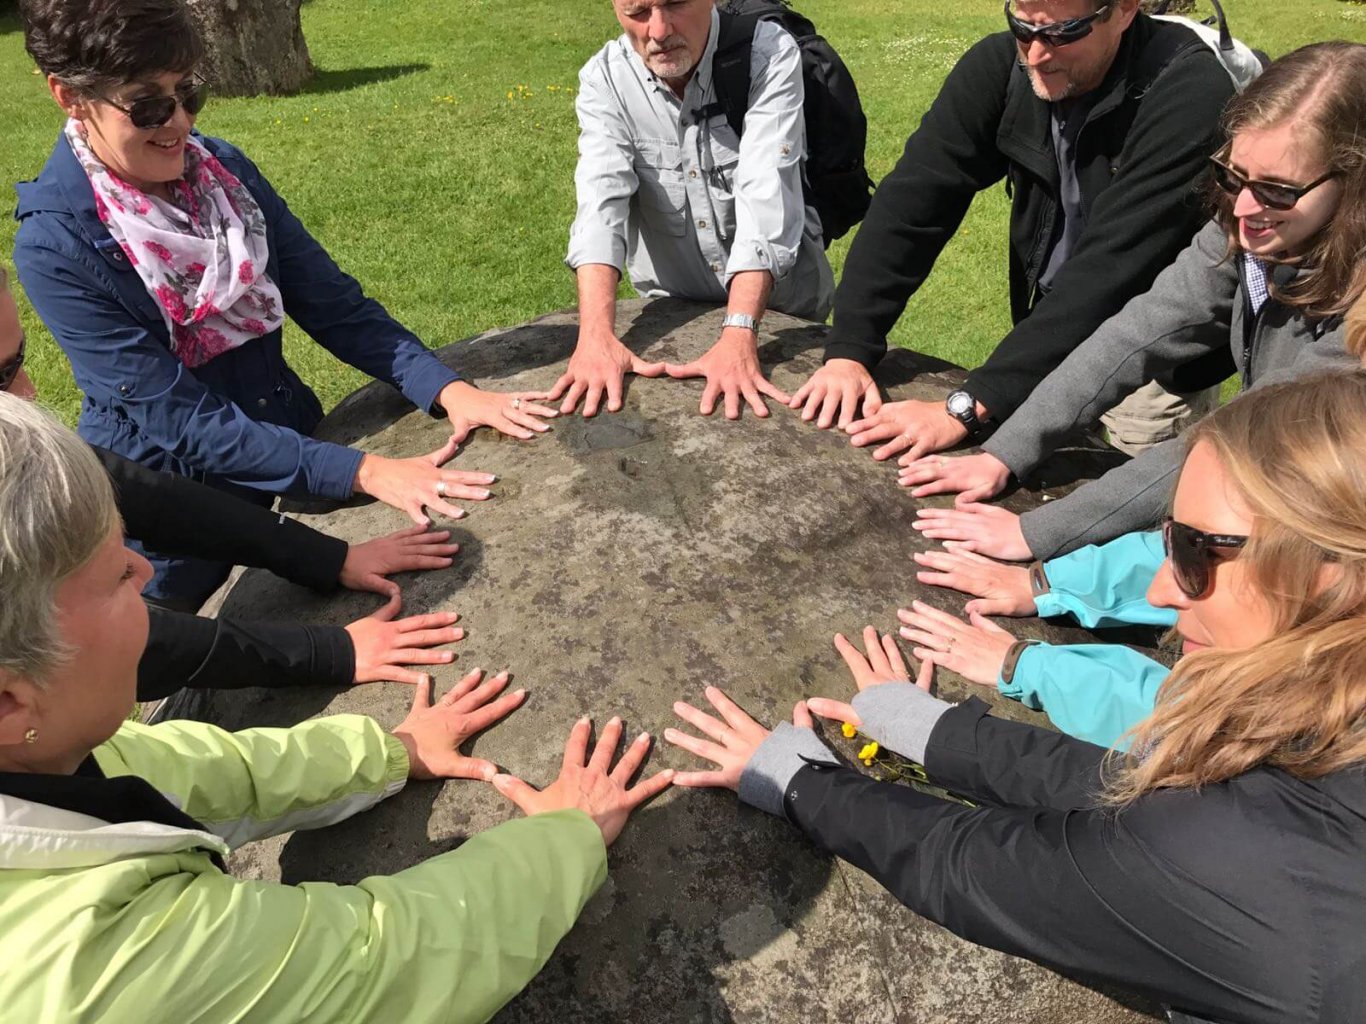 Driftwood tour group place their hands on an ancient stone